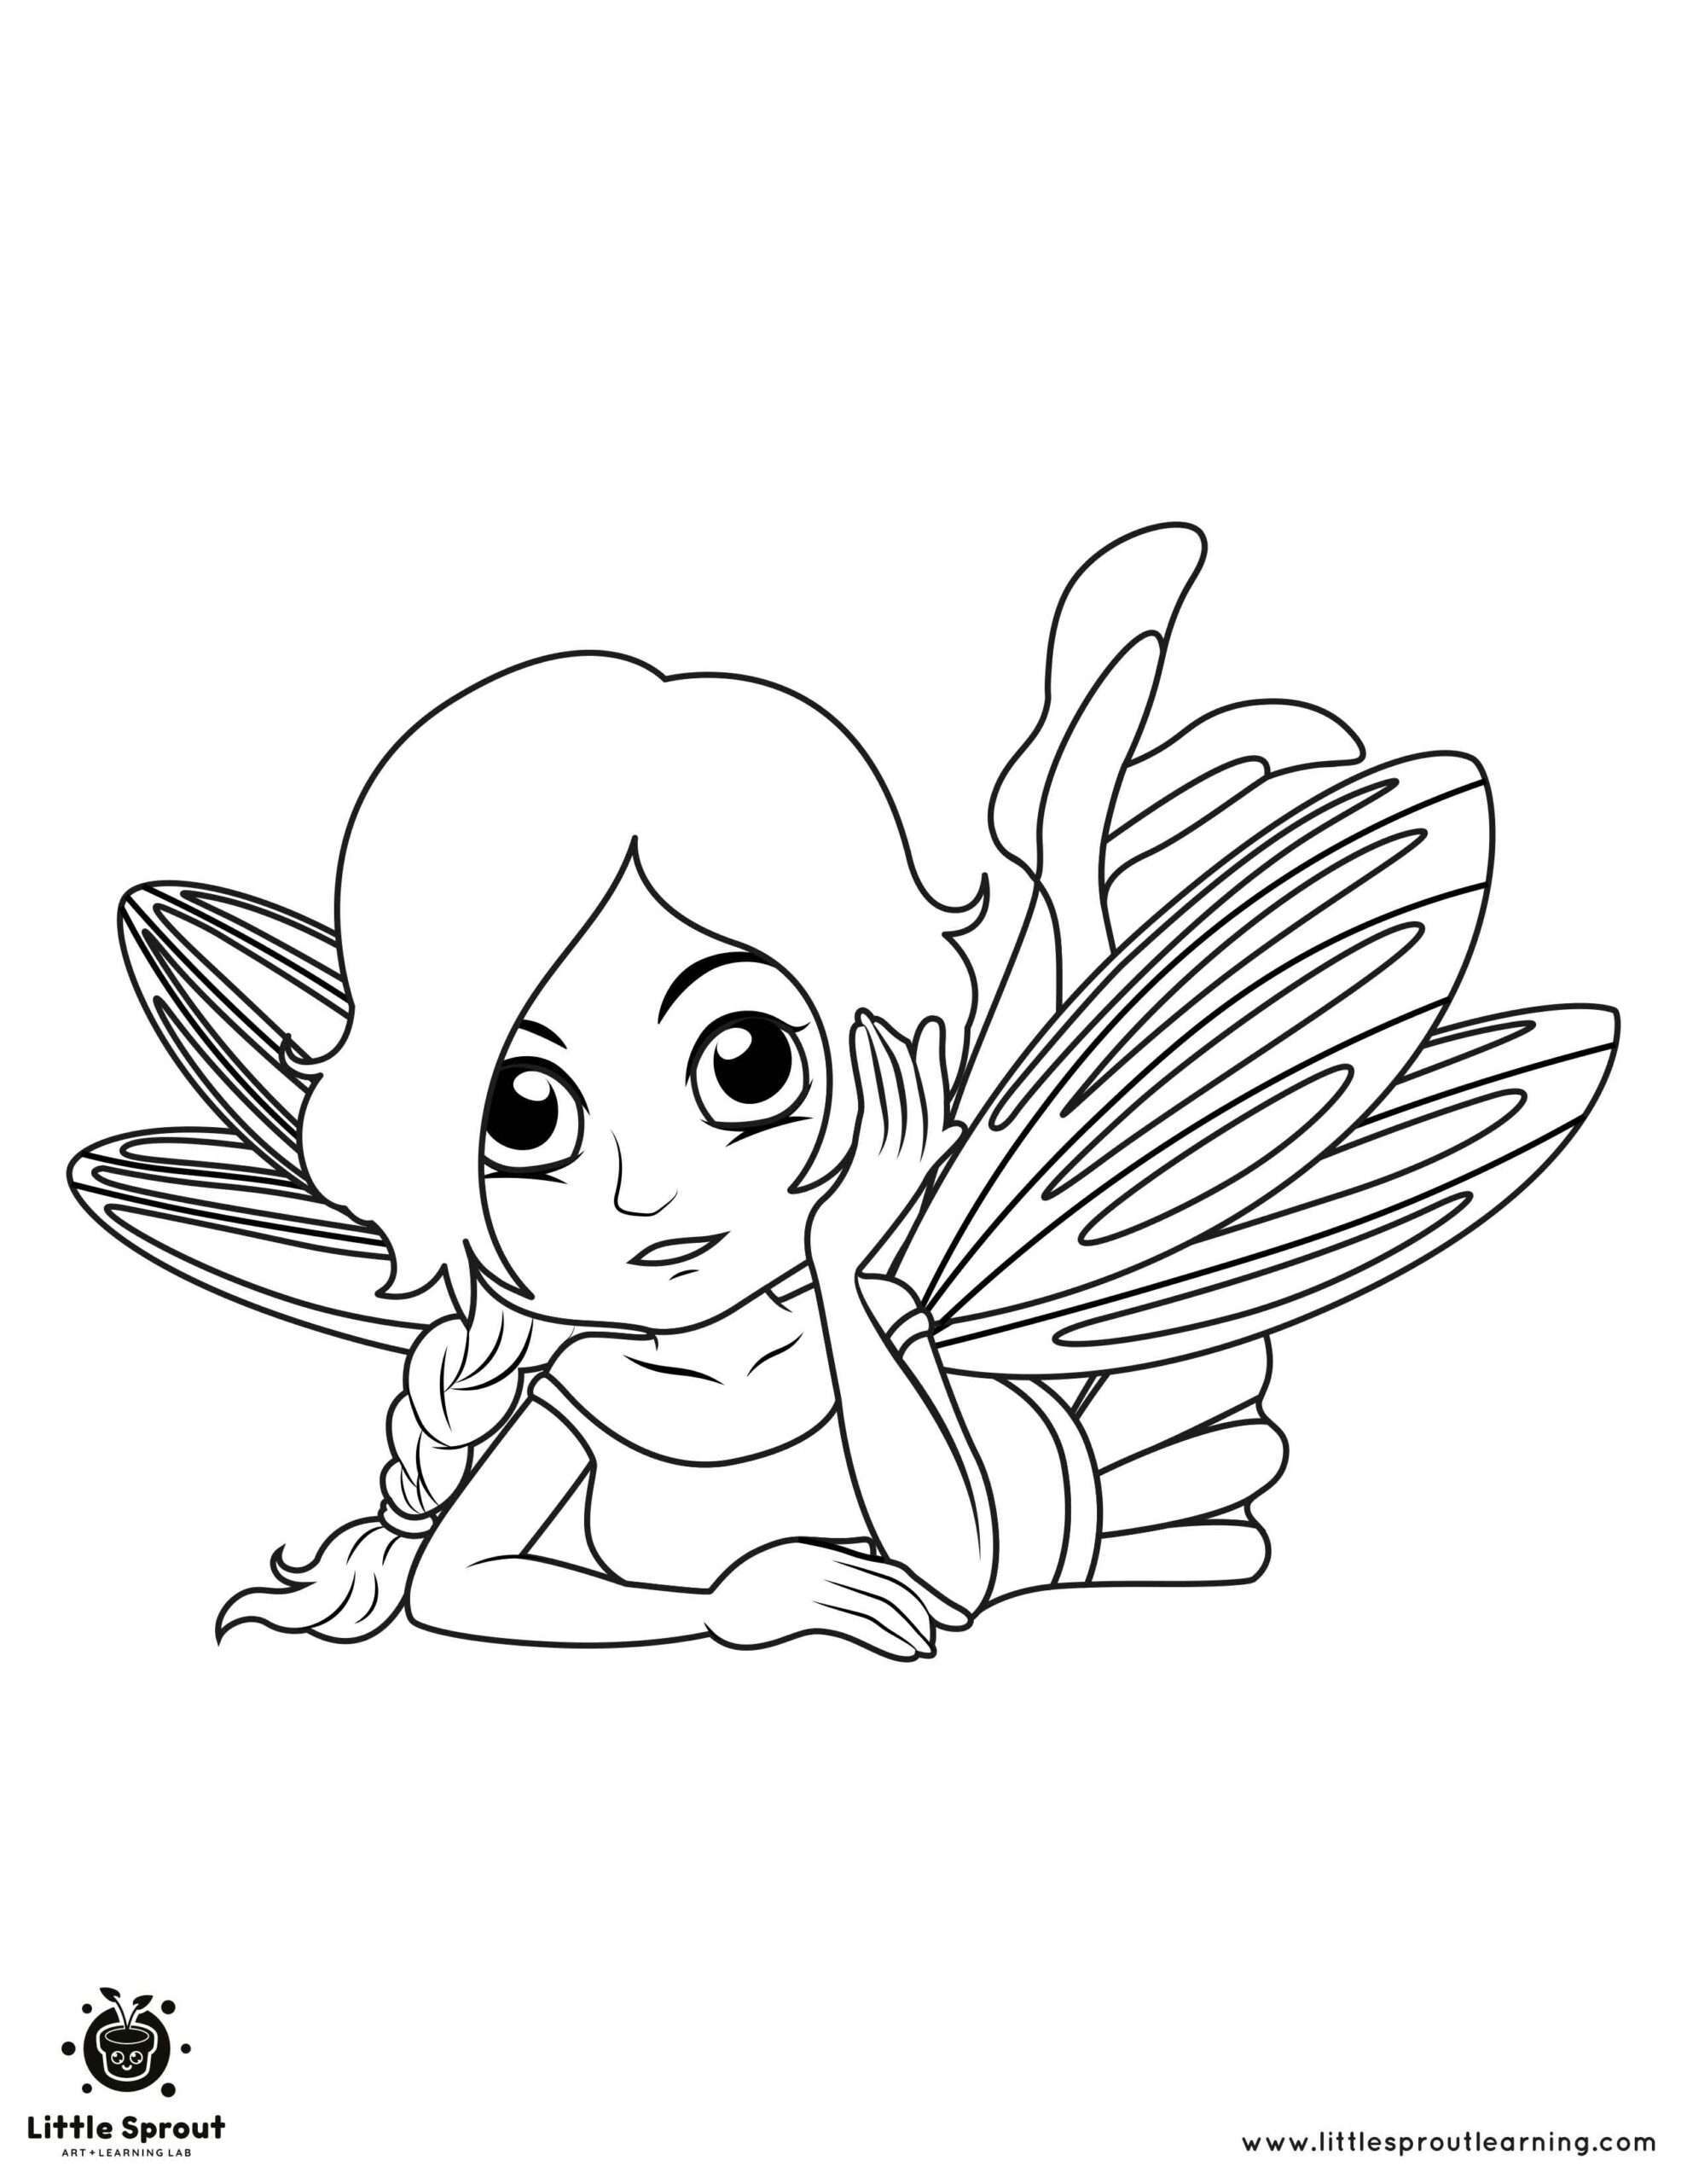 Relaxing Fairy Coloring Page